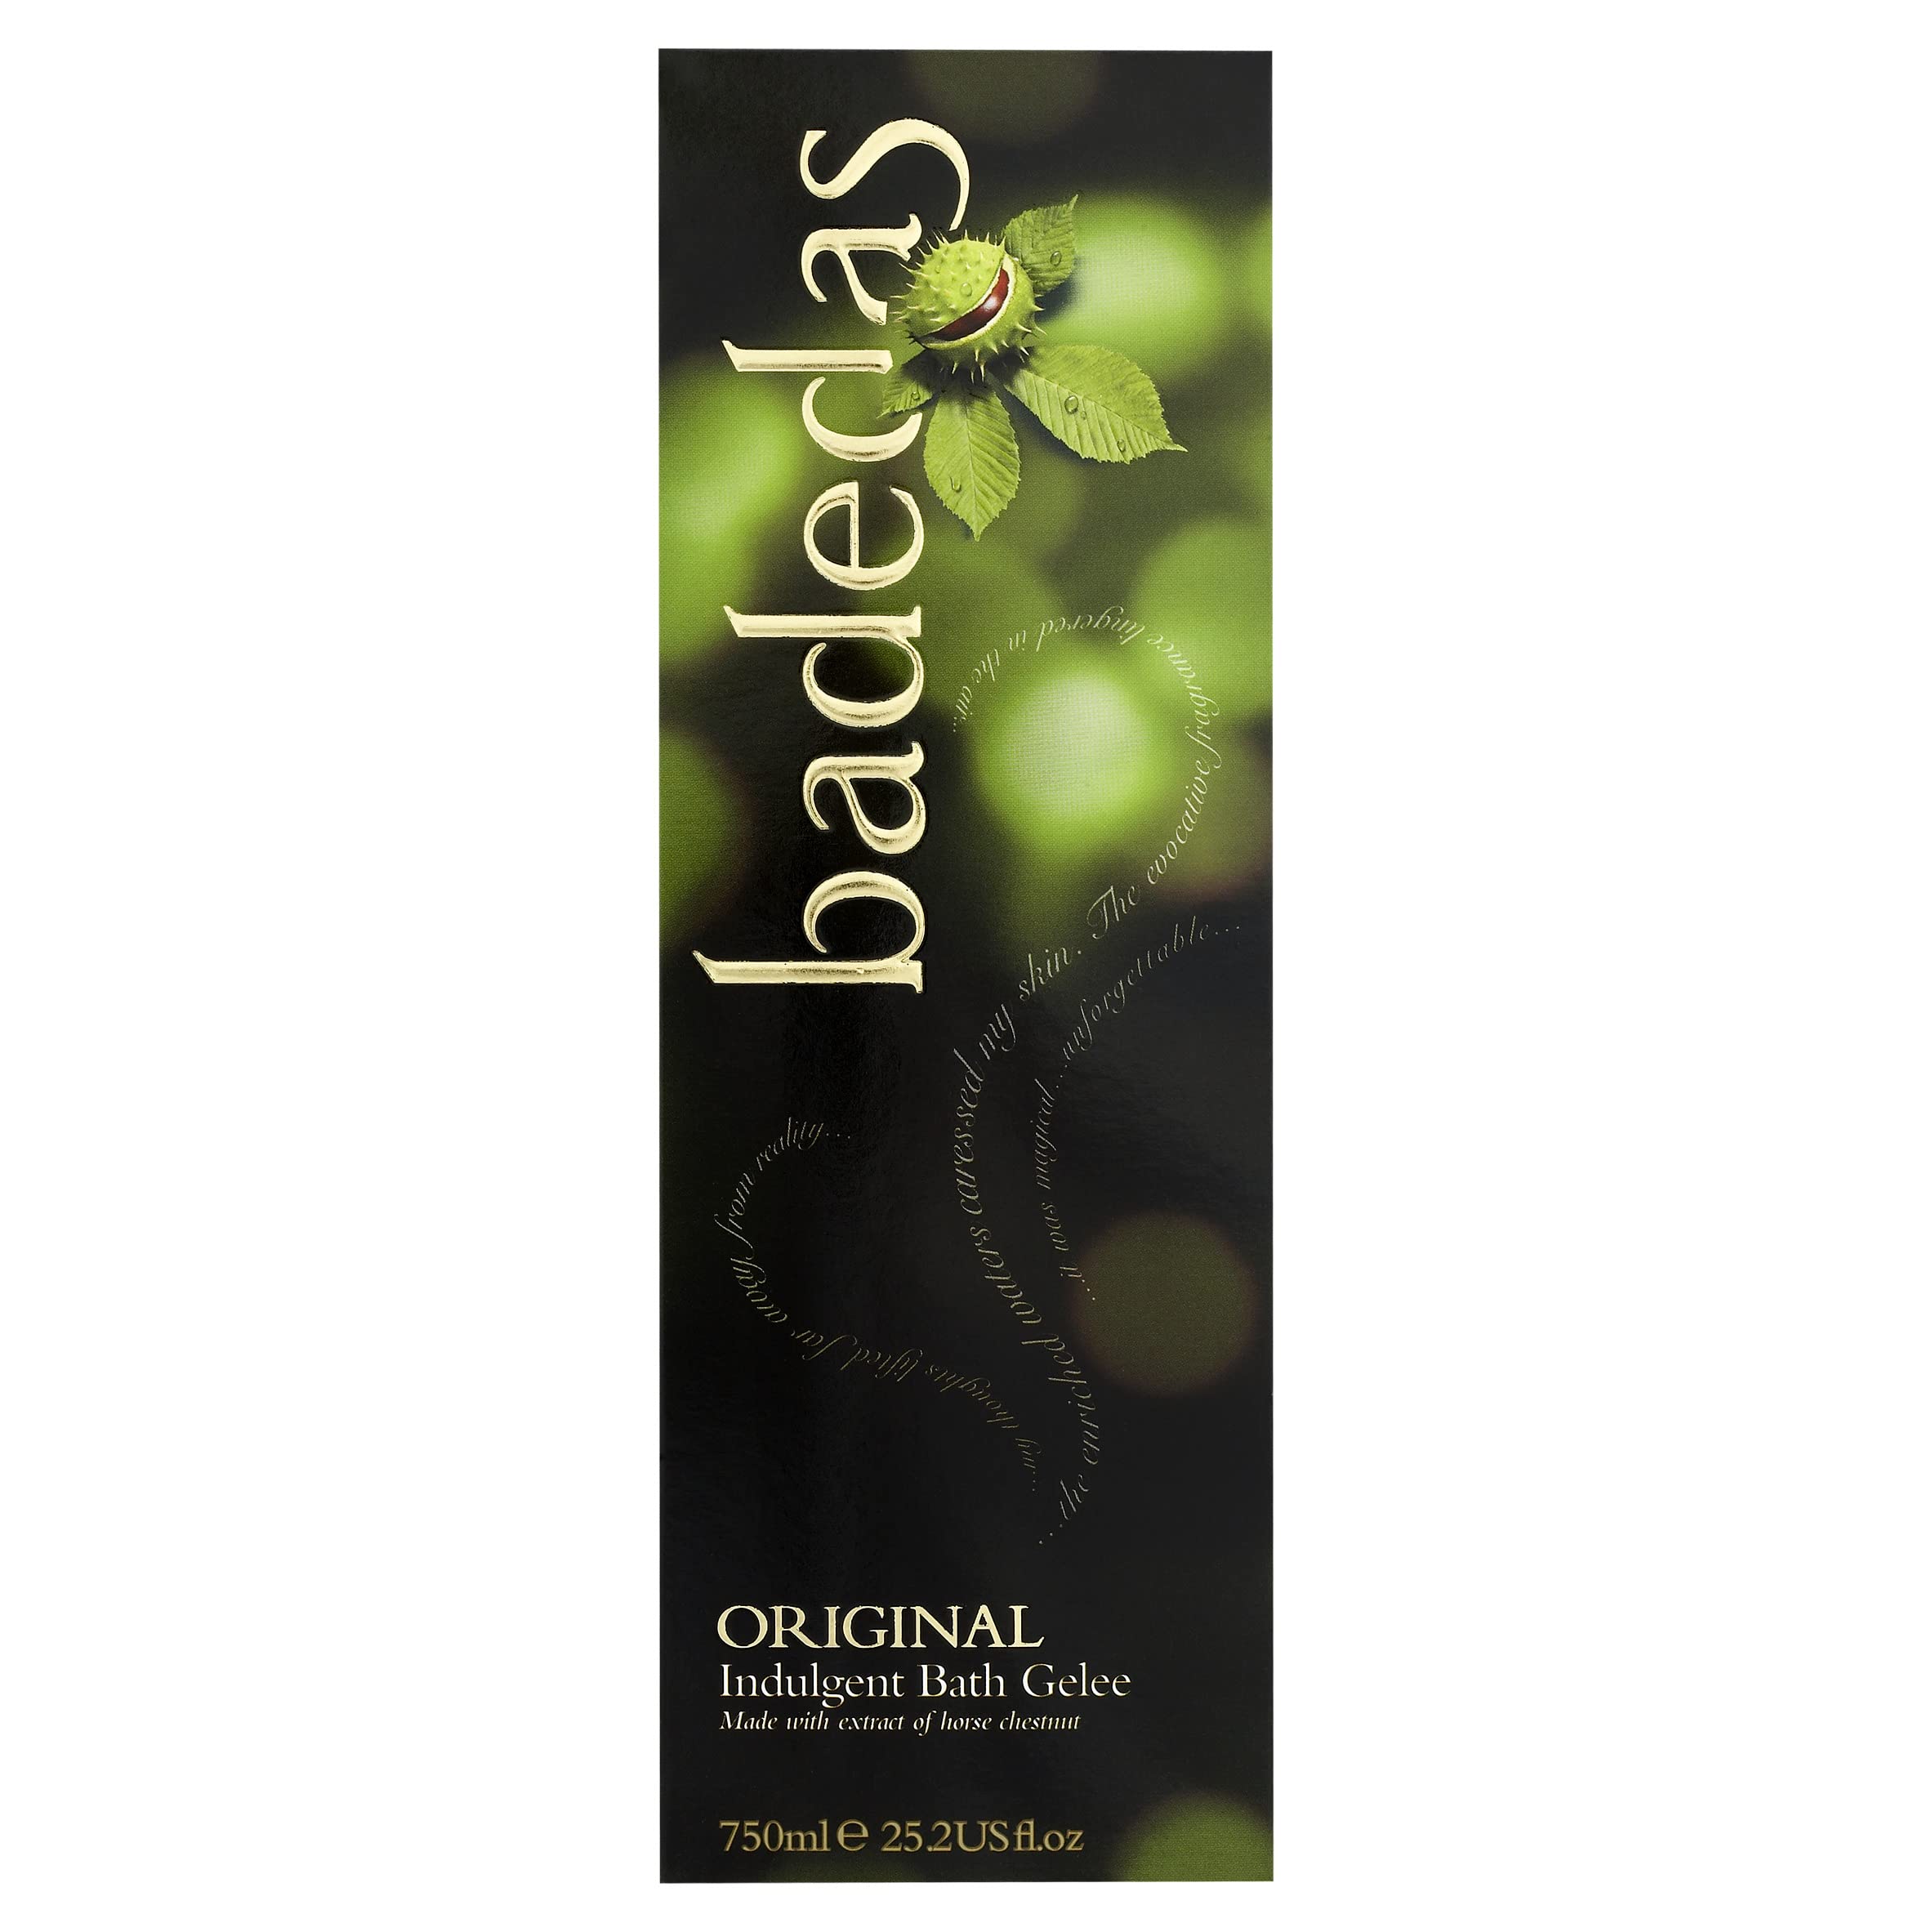 Badedas Original Indulgent Bath Gel, Enriched with Natural Plant Extracts for a Luxury Bubble Bath, 750ml